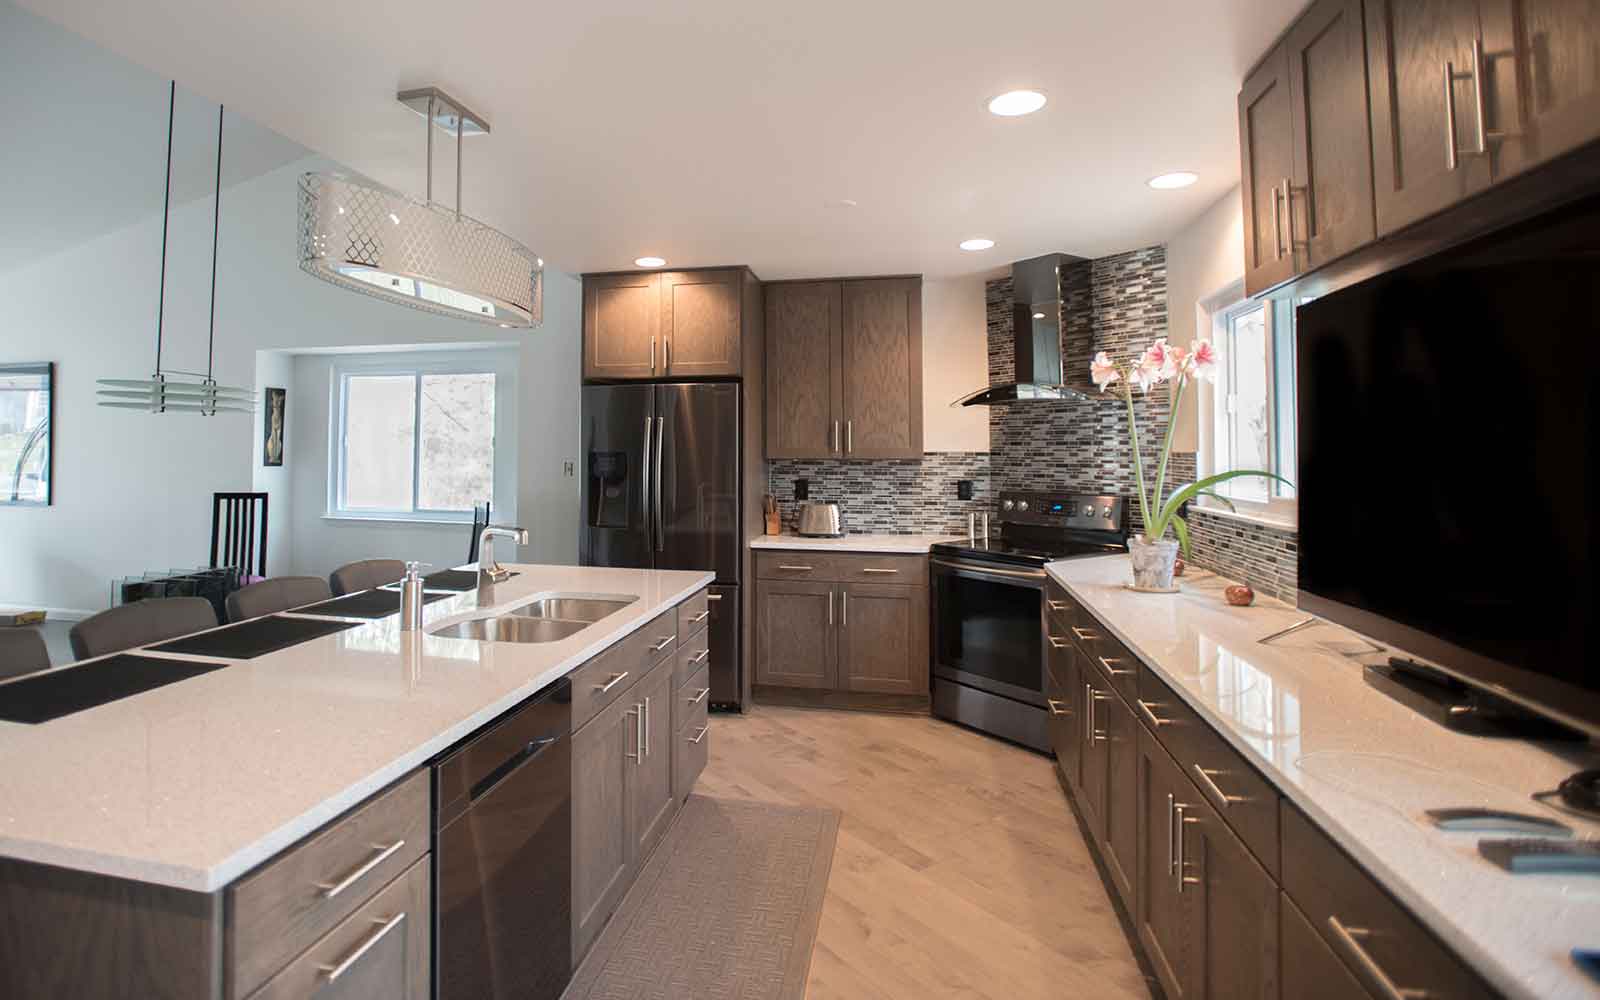 Brothers Services Updates and Remodels Kitchens in Maryland